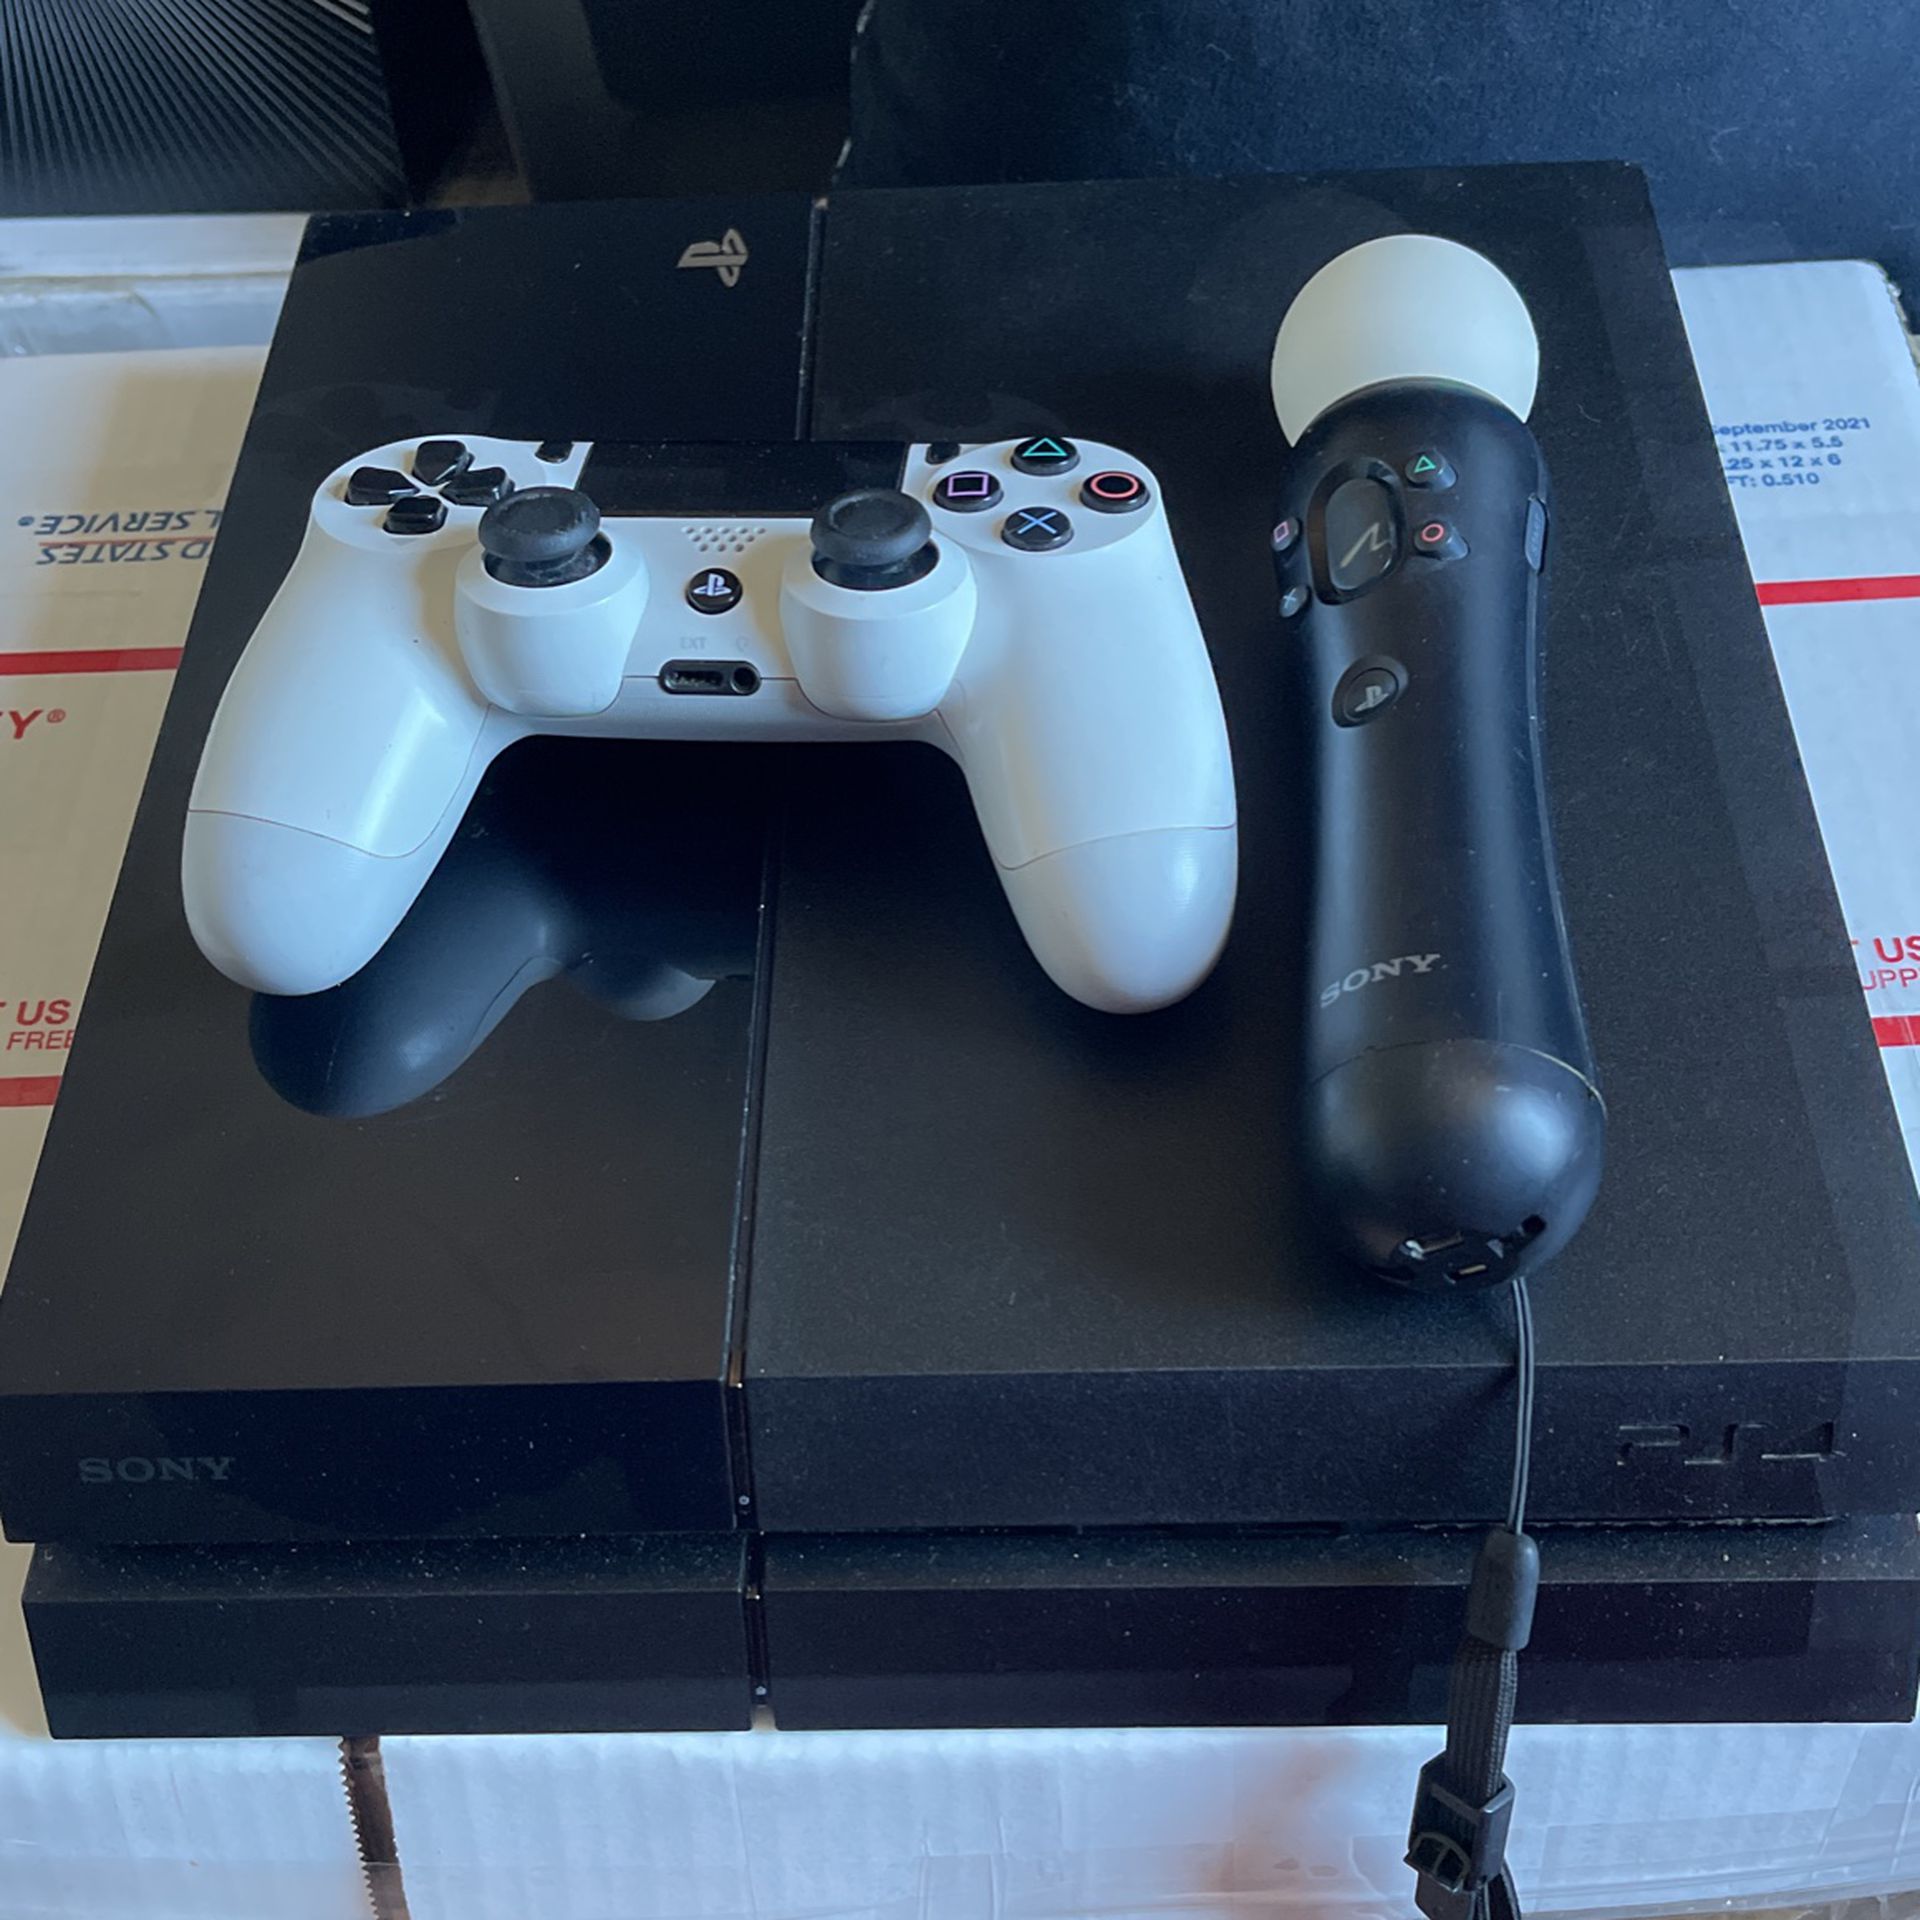 Okklusion sommerfugl tro Ps4 Console for Sale in Tacoma, WA - OfferUp